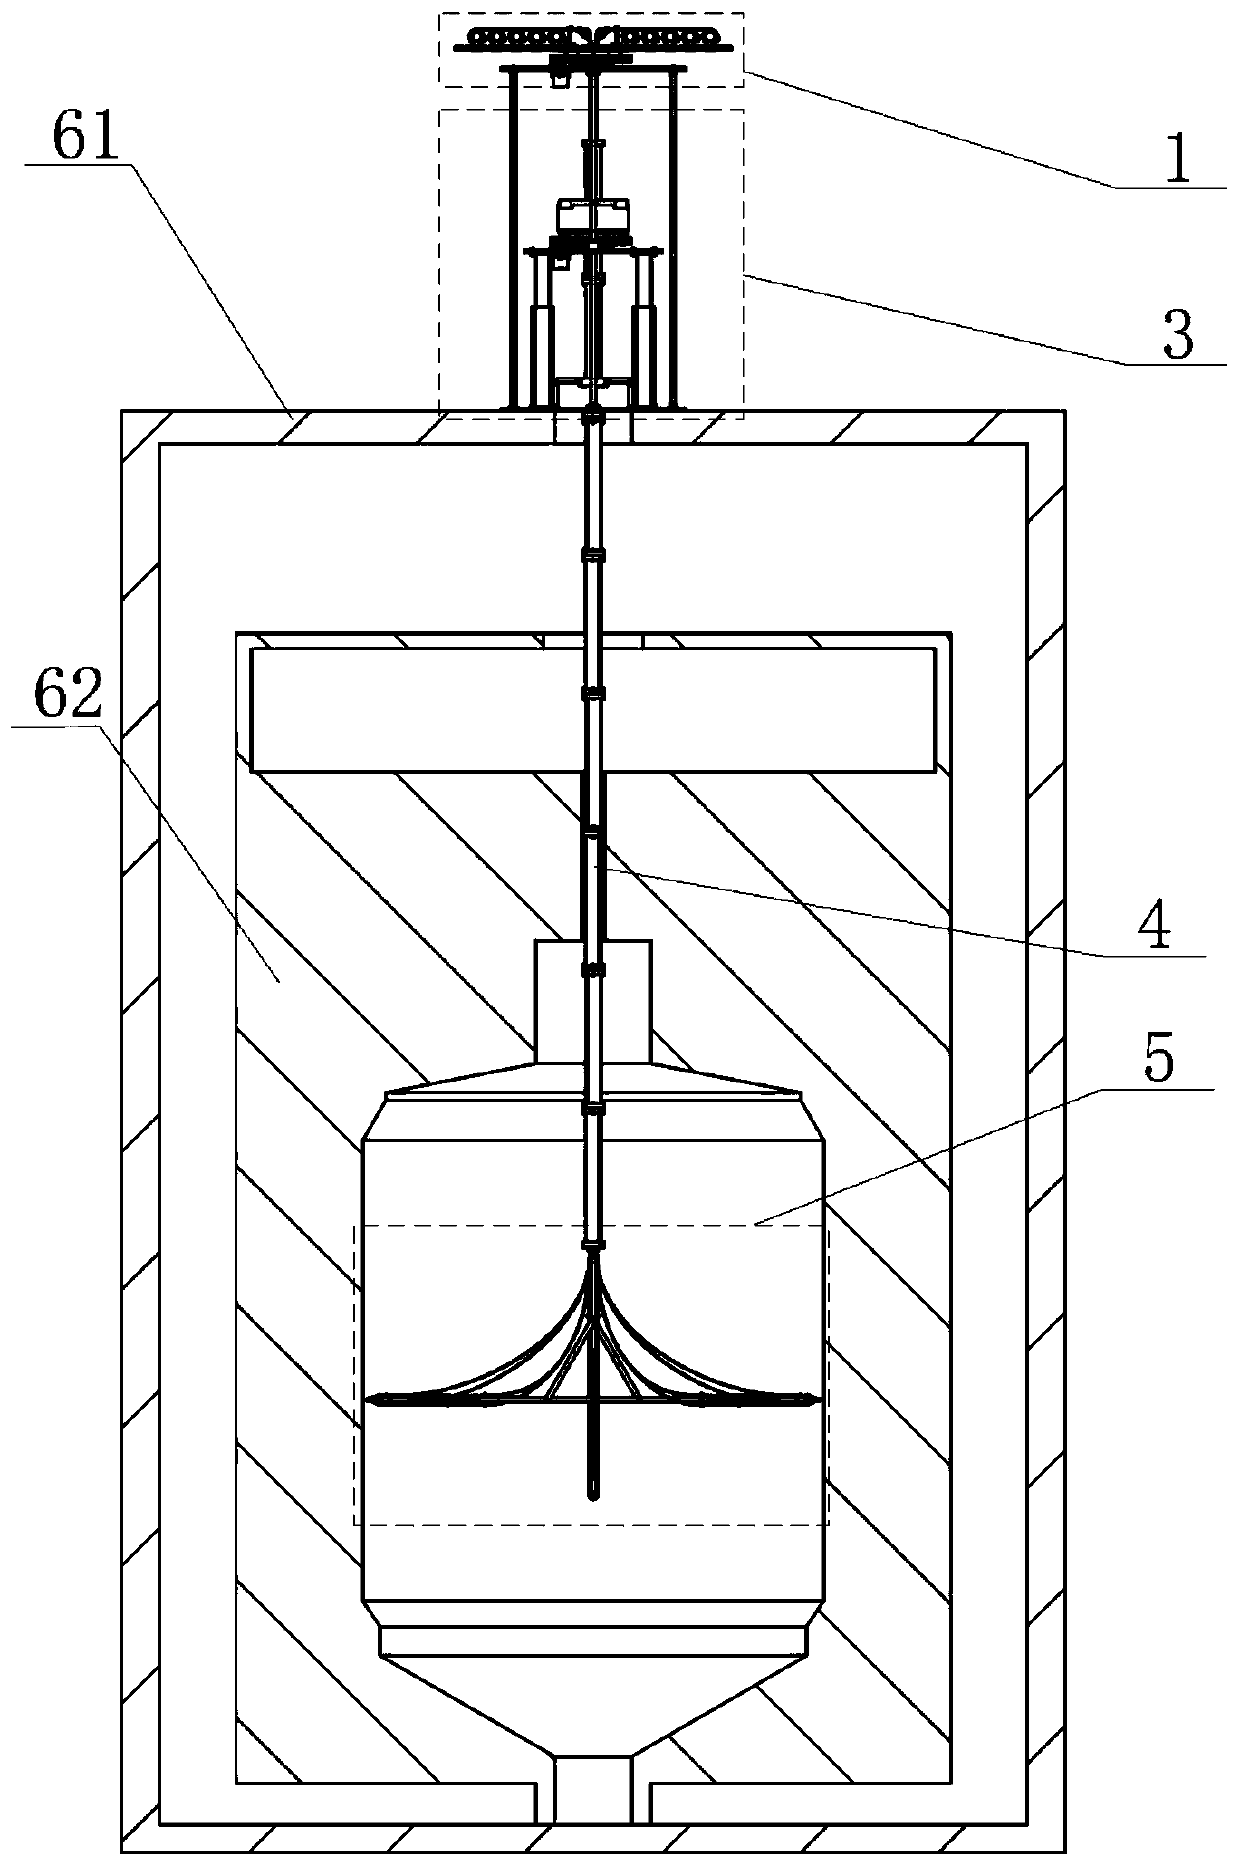 Robotic device for visual inspection of internal components of pebble bed reactor core cavity